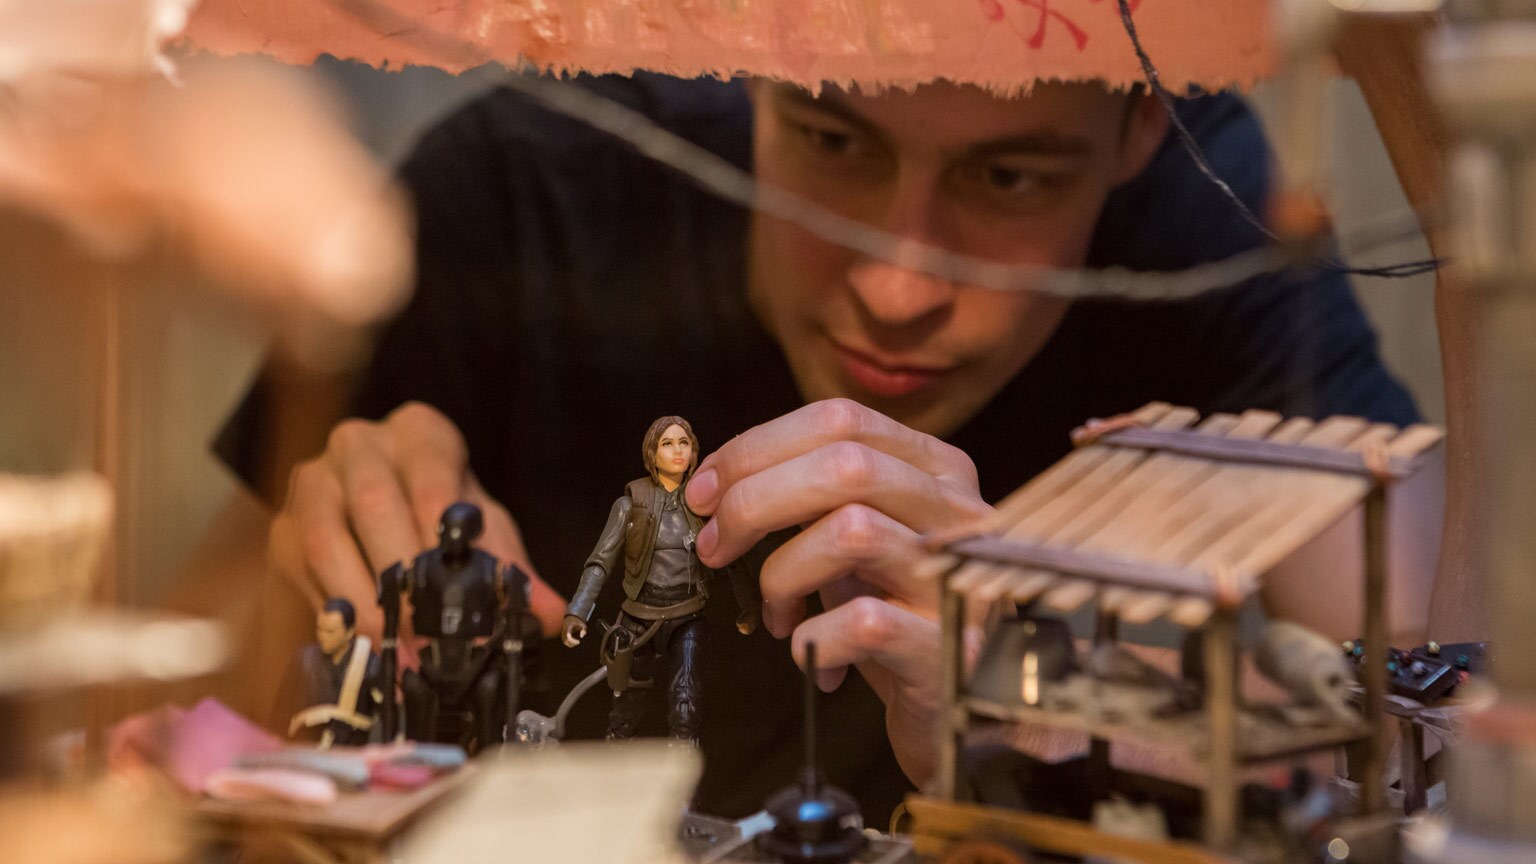 Rebelling with Stop-Motion: Q&A with the Creators of Go Rogue Videos